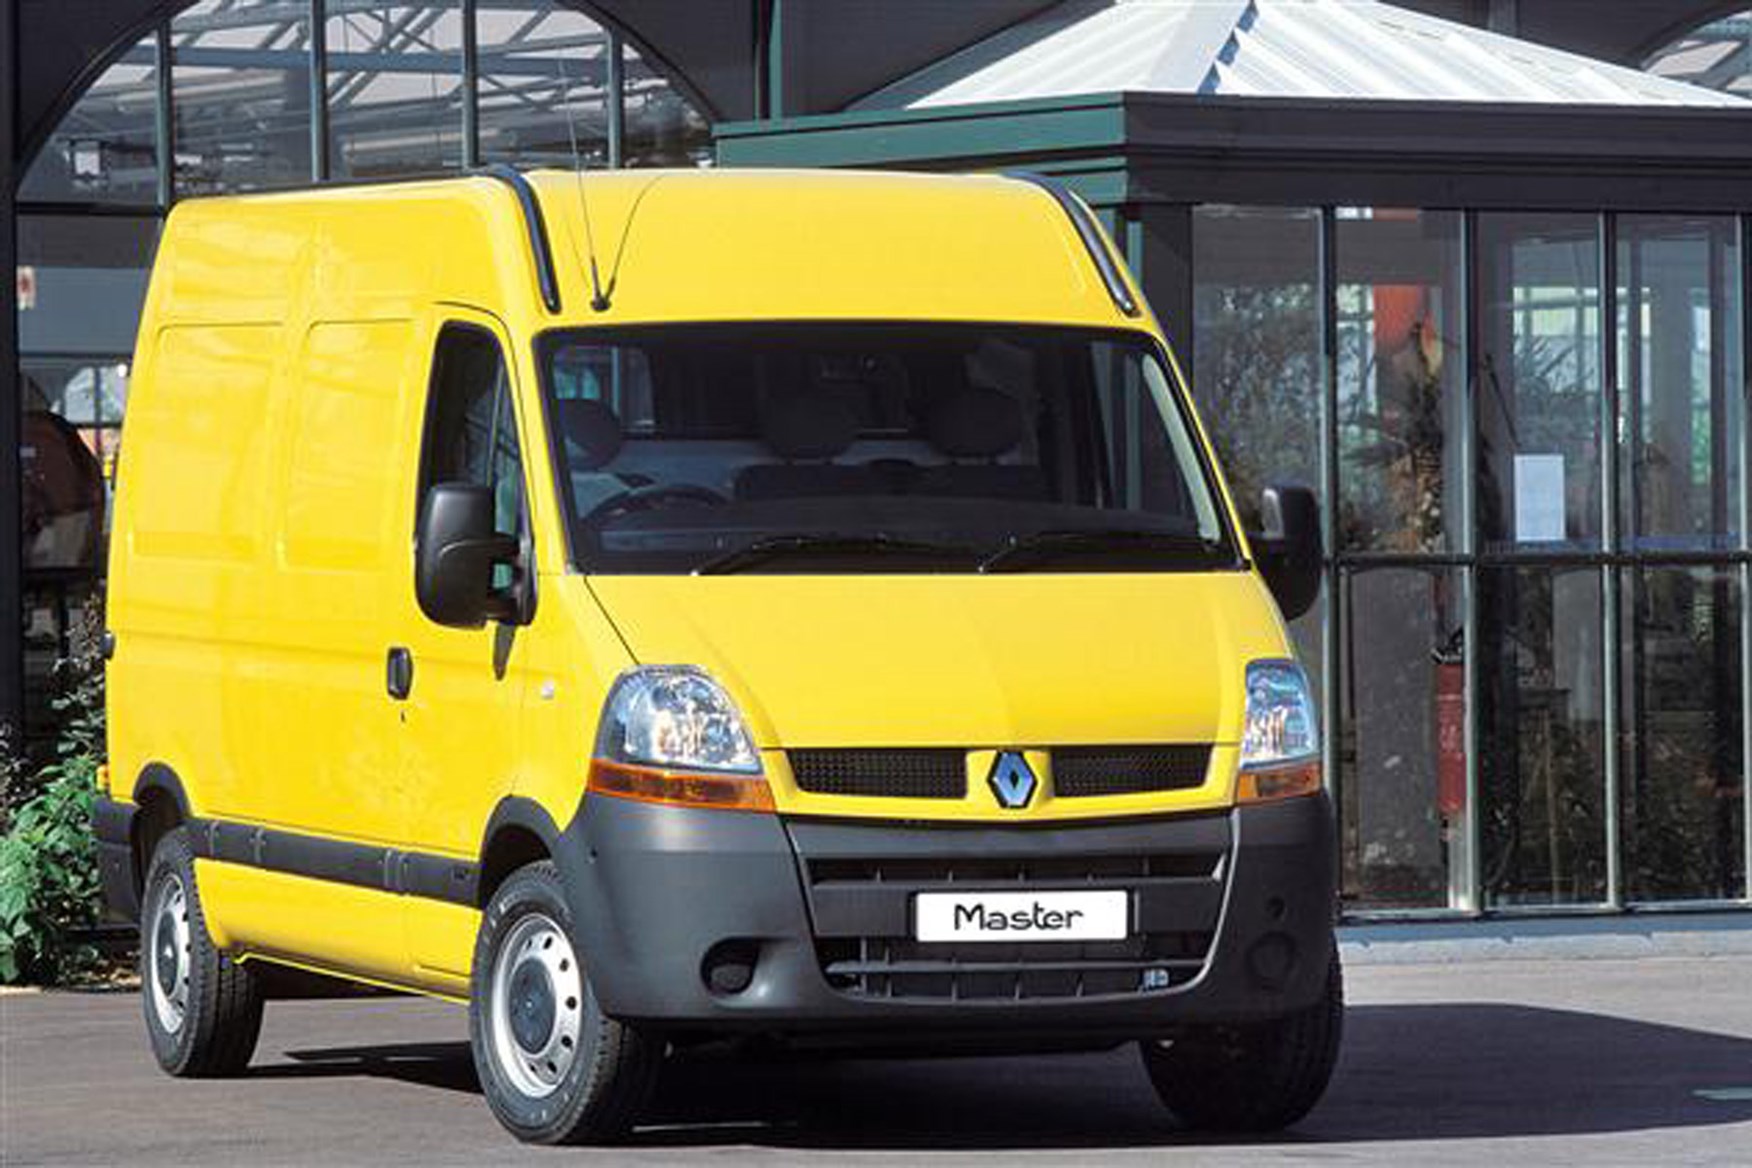 Renault Master review on Parkers Vans - front exterior